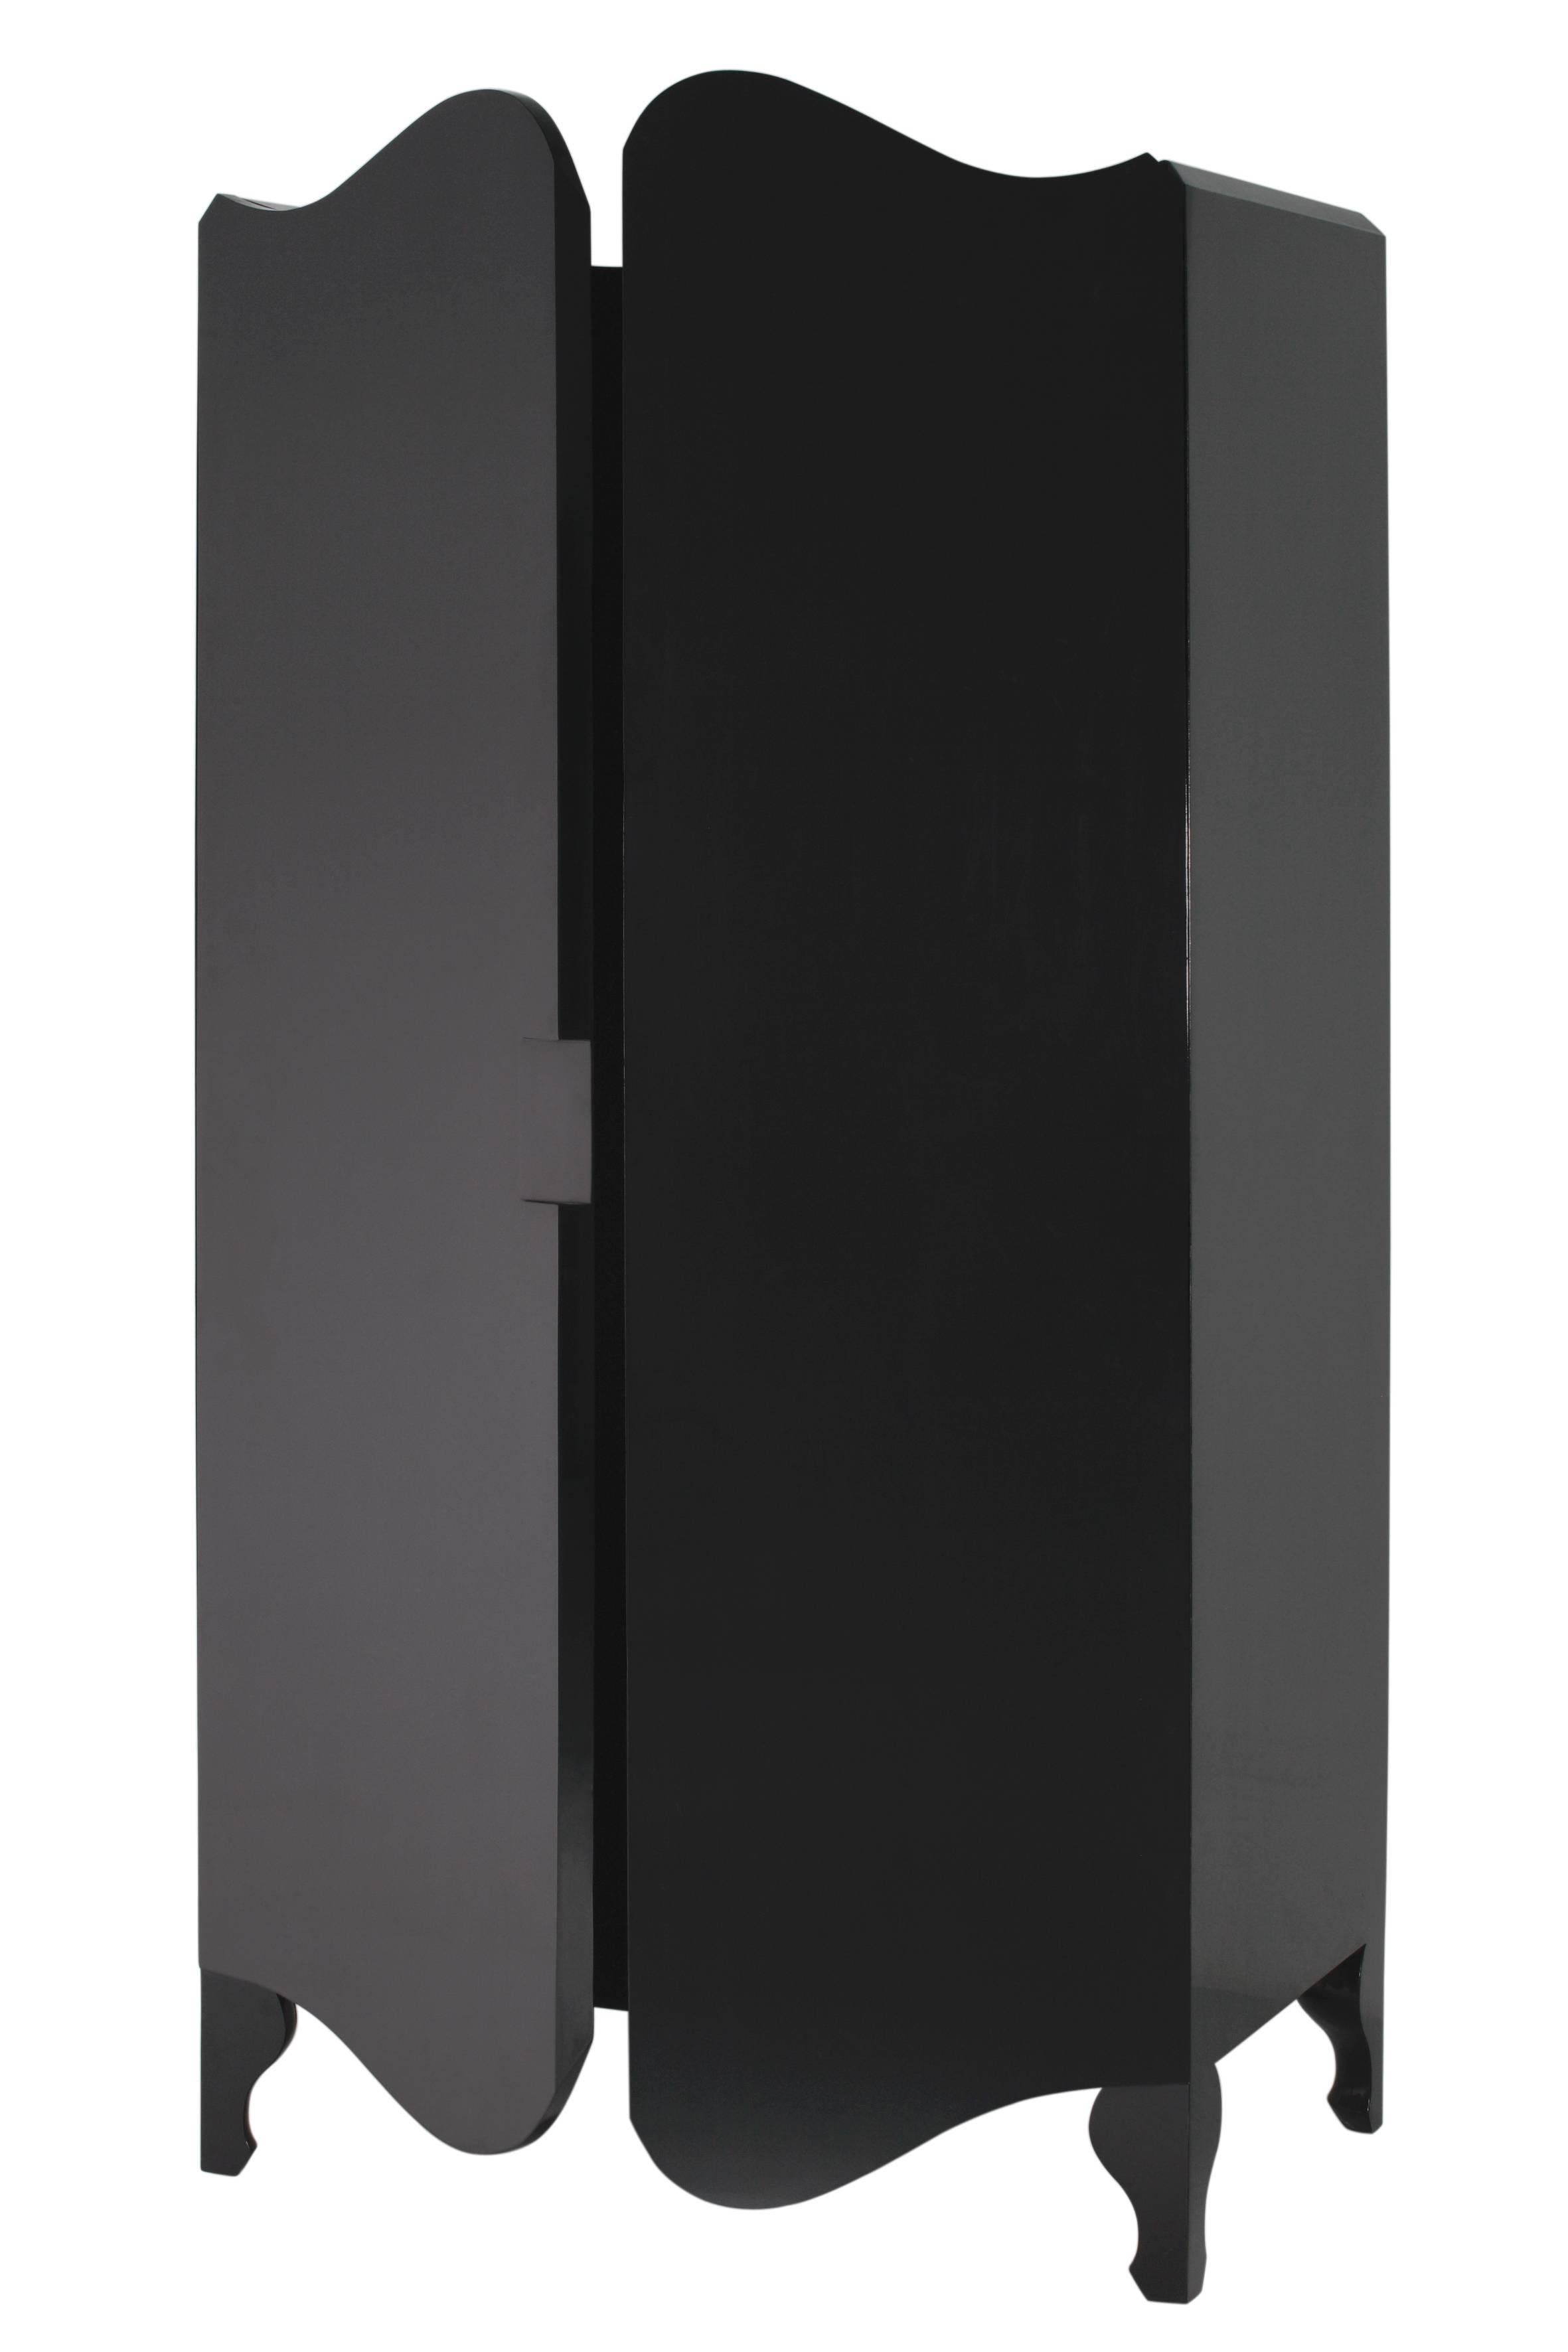 A tall handsome armoire whose curves may be finer than your own. Includes one adjustable shoe shelf and matching metal hanging rail inside. Extremely sturdy and fully knock down for self-assembly. 

Material: Tough polyurethane lacquer on MDF,